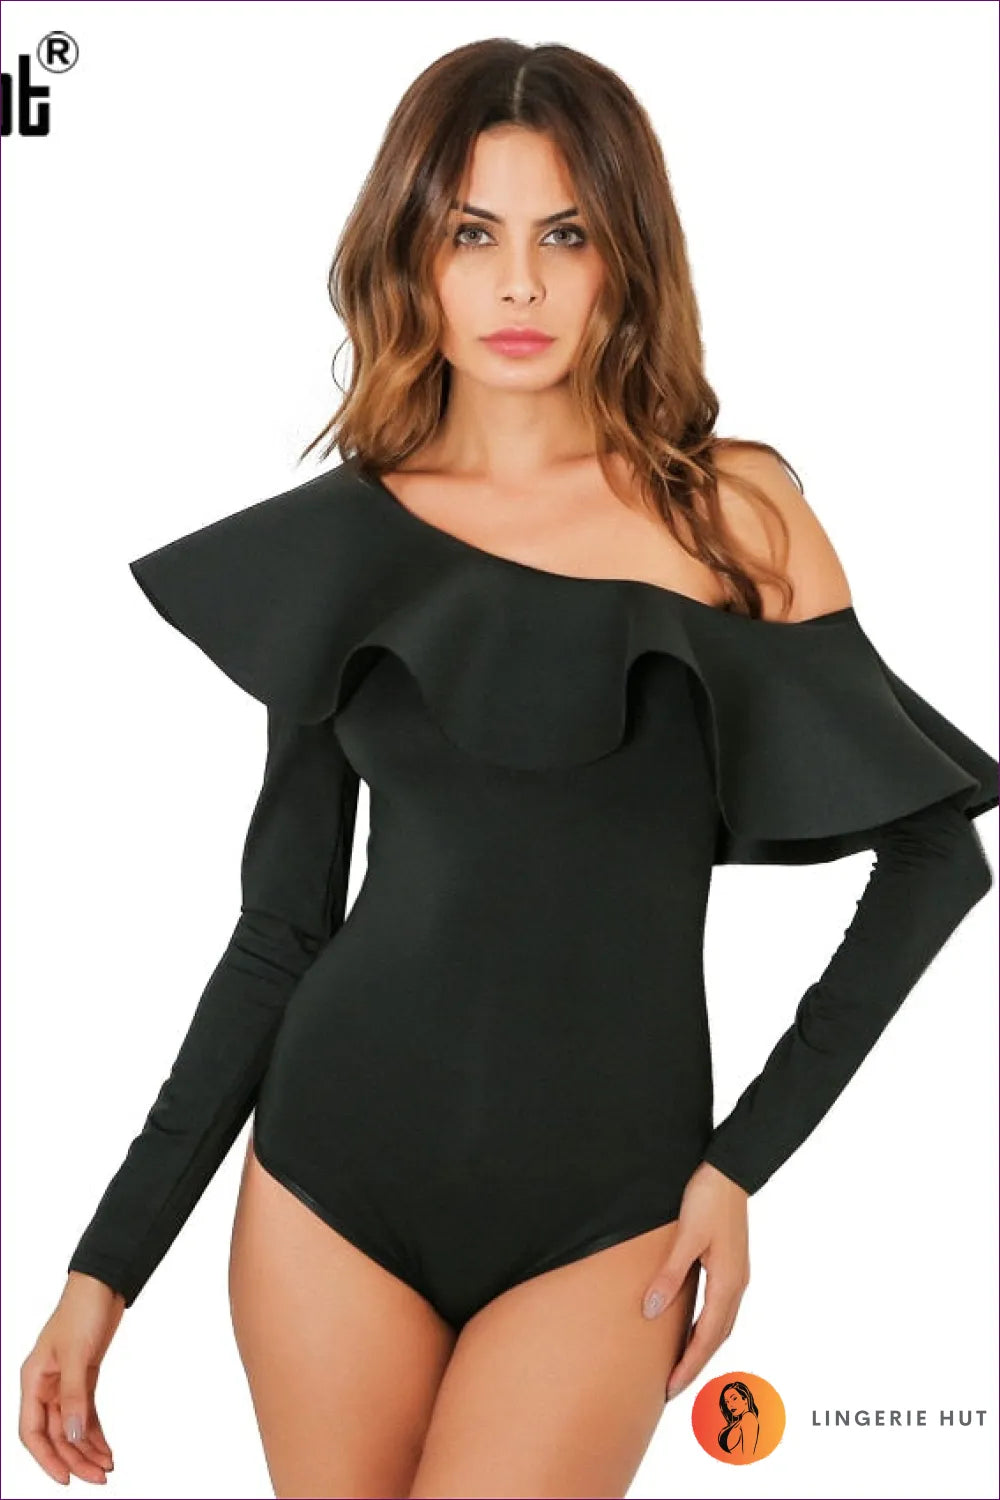 Discover Timeless Elegance With Our Elegant Long Sleeve Black Bodysuit. Ruffled Shoulders, High Waist, And In